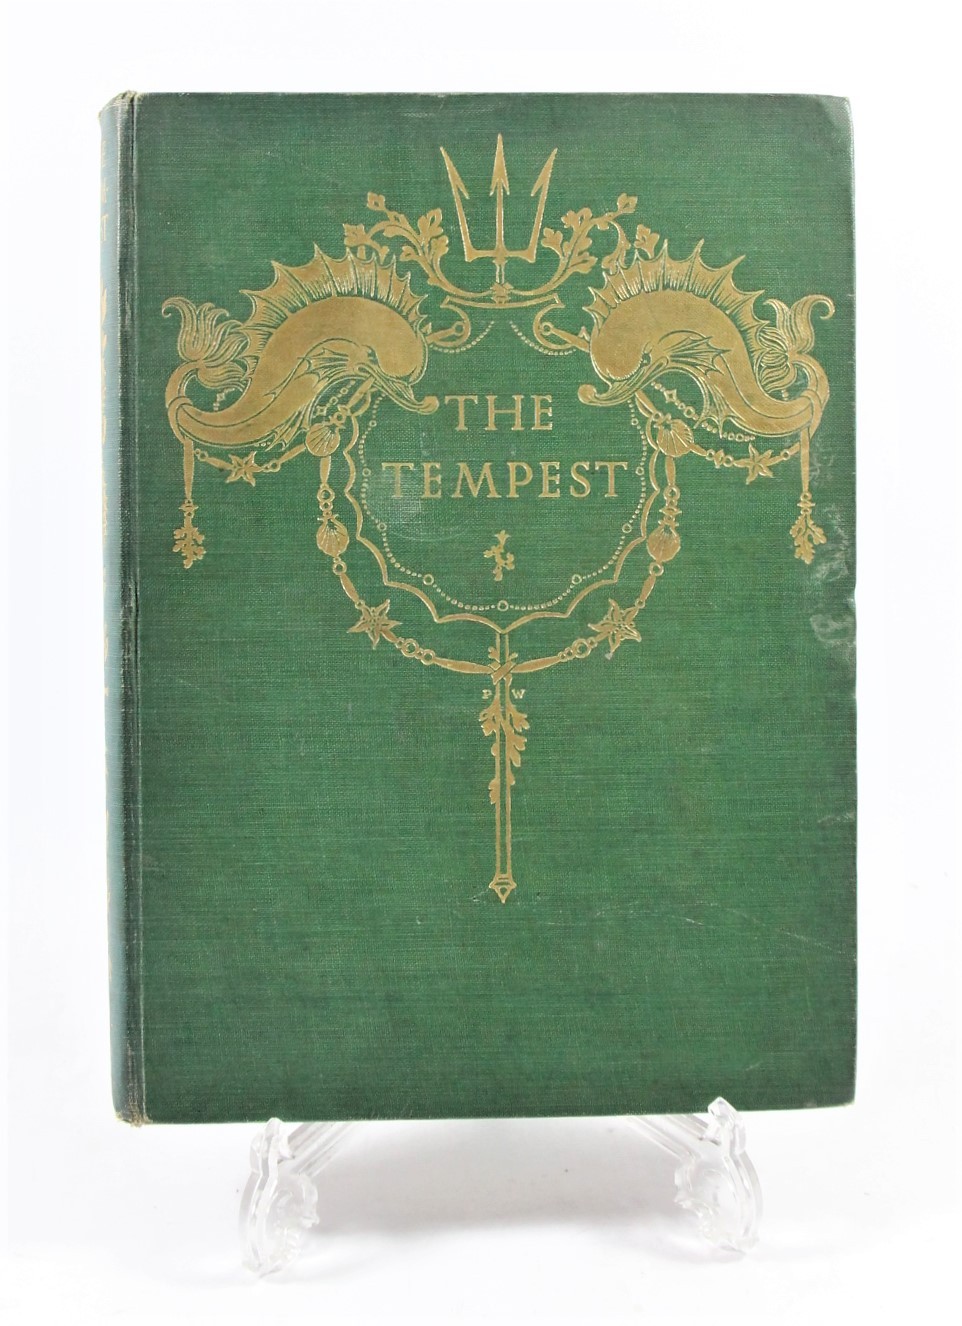 Shakespeare William. The Tempest with illustrations by Paul Woodroffe and songs by Joseph Moorat,